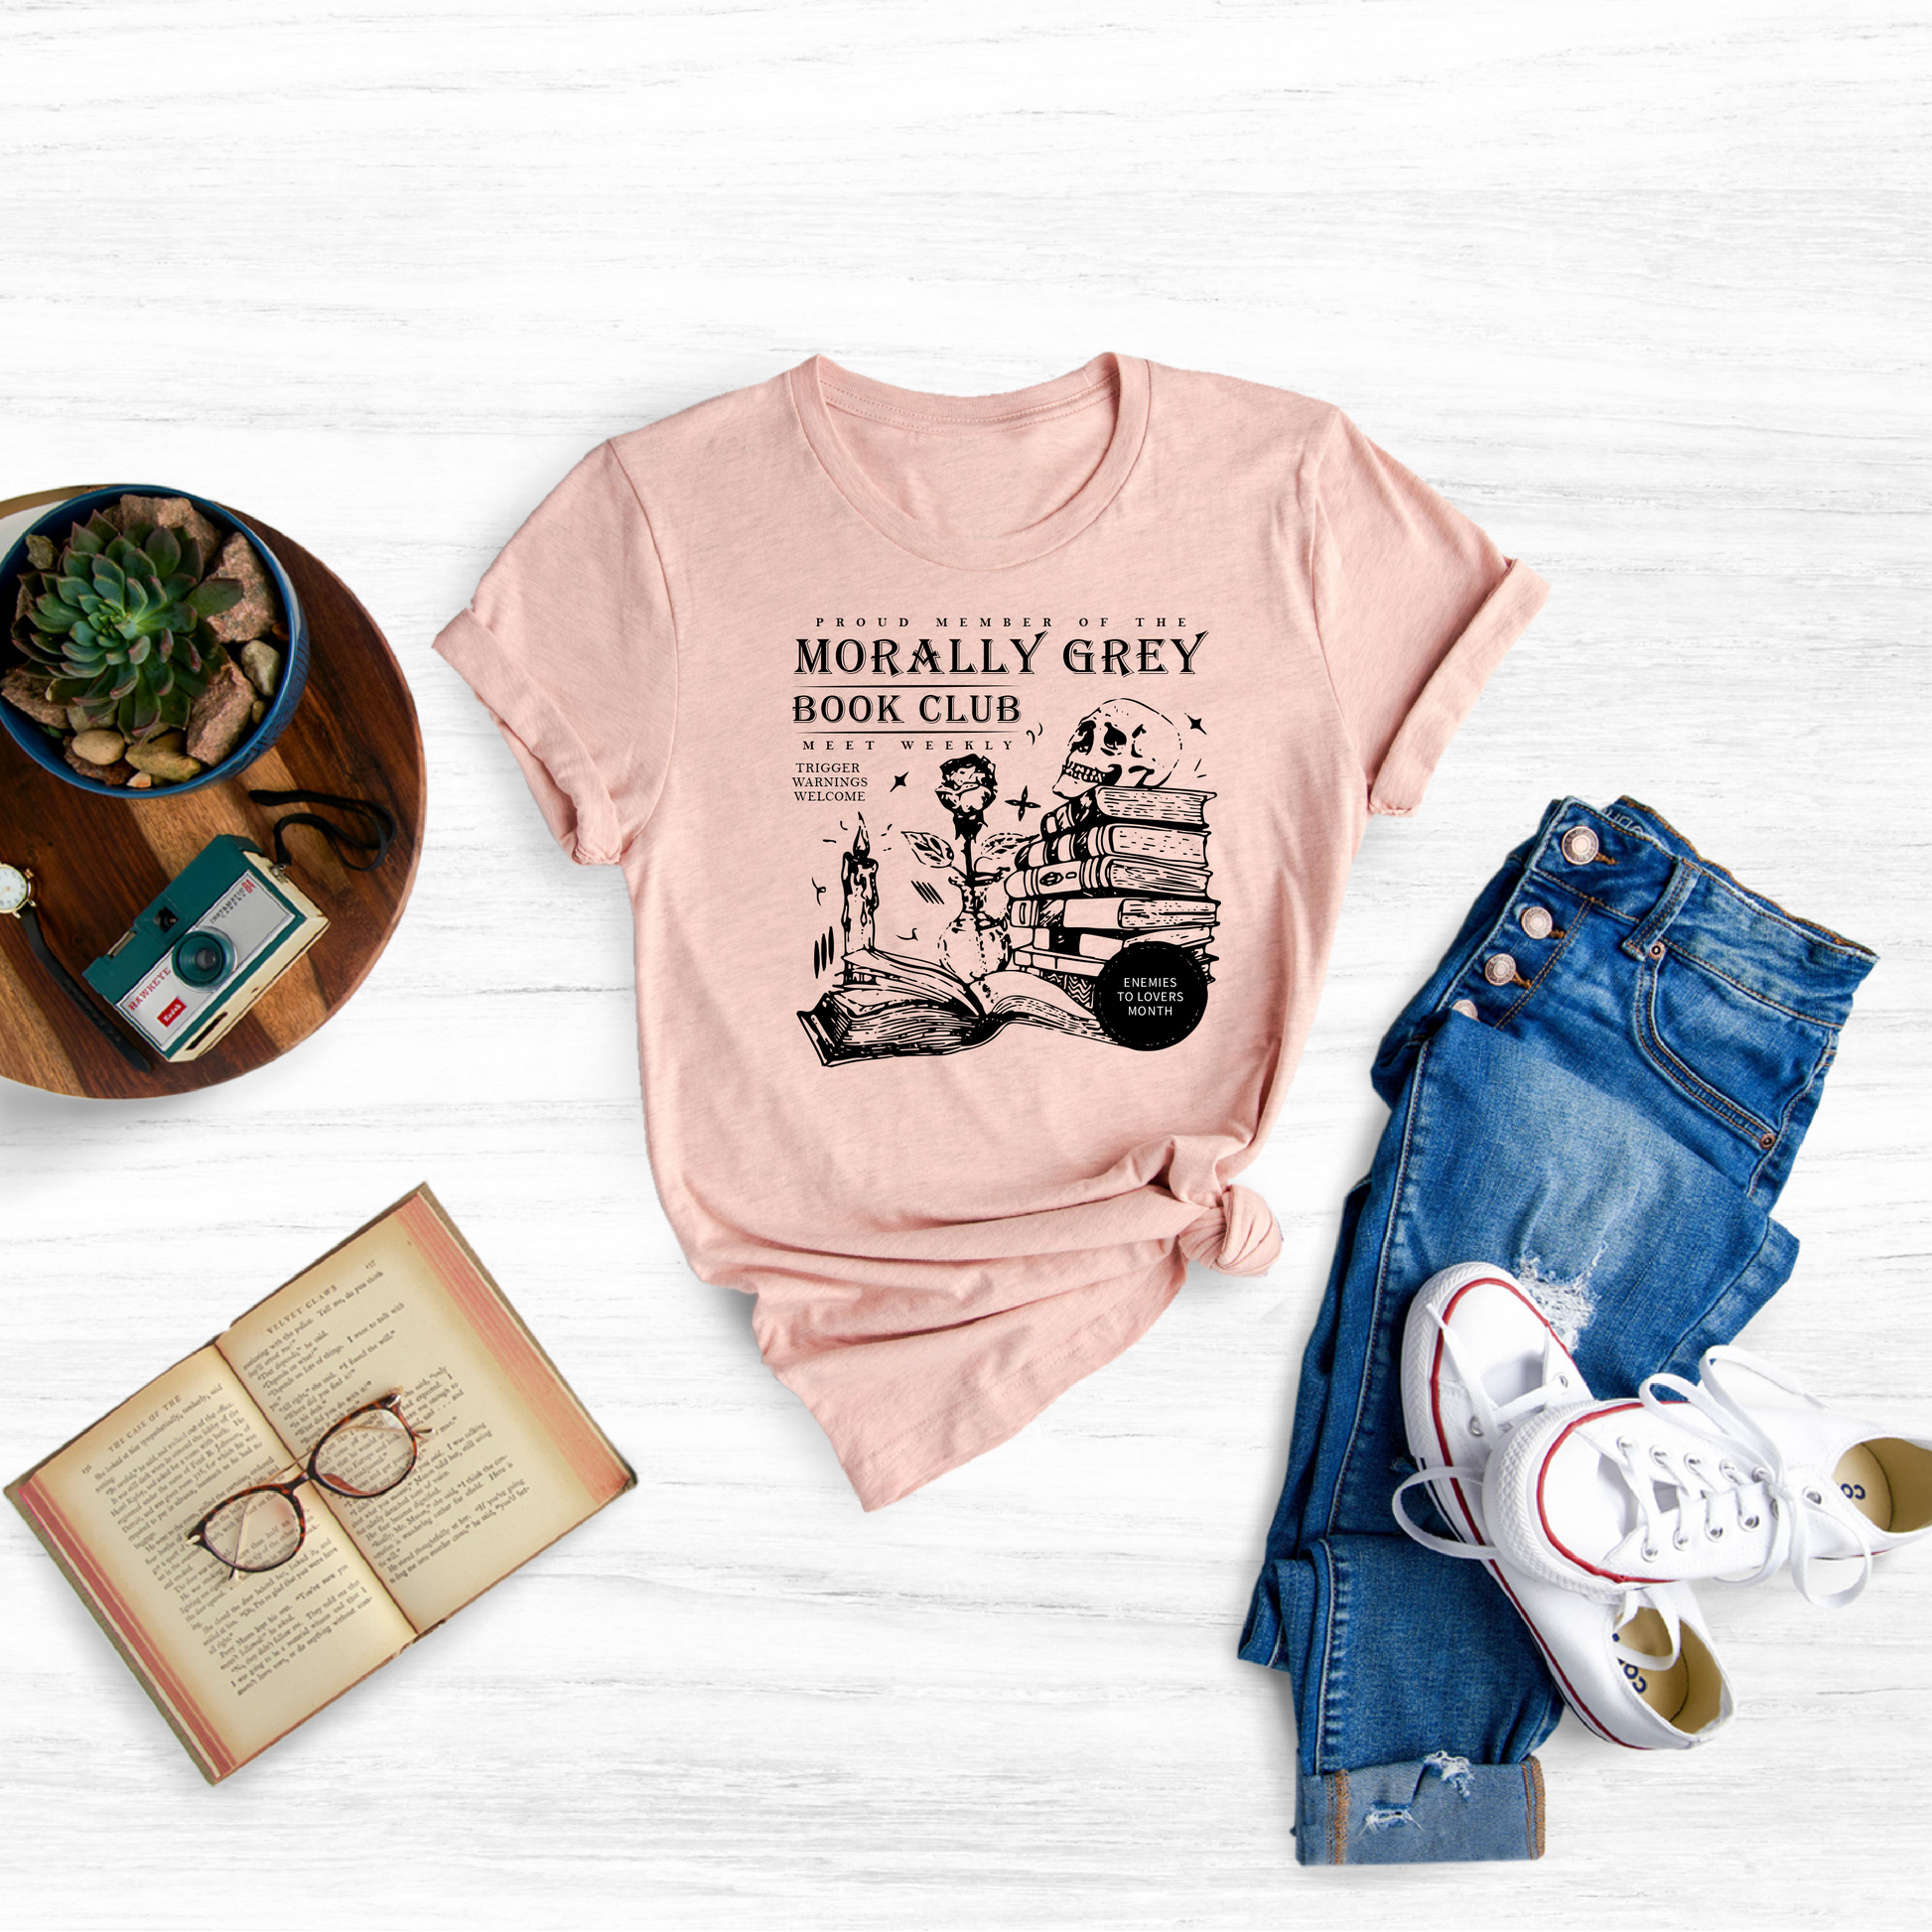 Delve into the World of Morally Grey Literature with the Enchanting "Morally Grey Book Club Shirt, Spooky Season T-shirt"